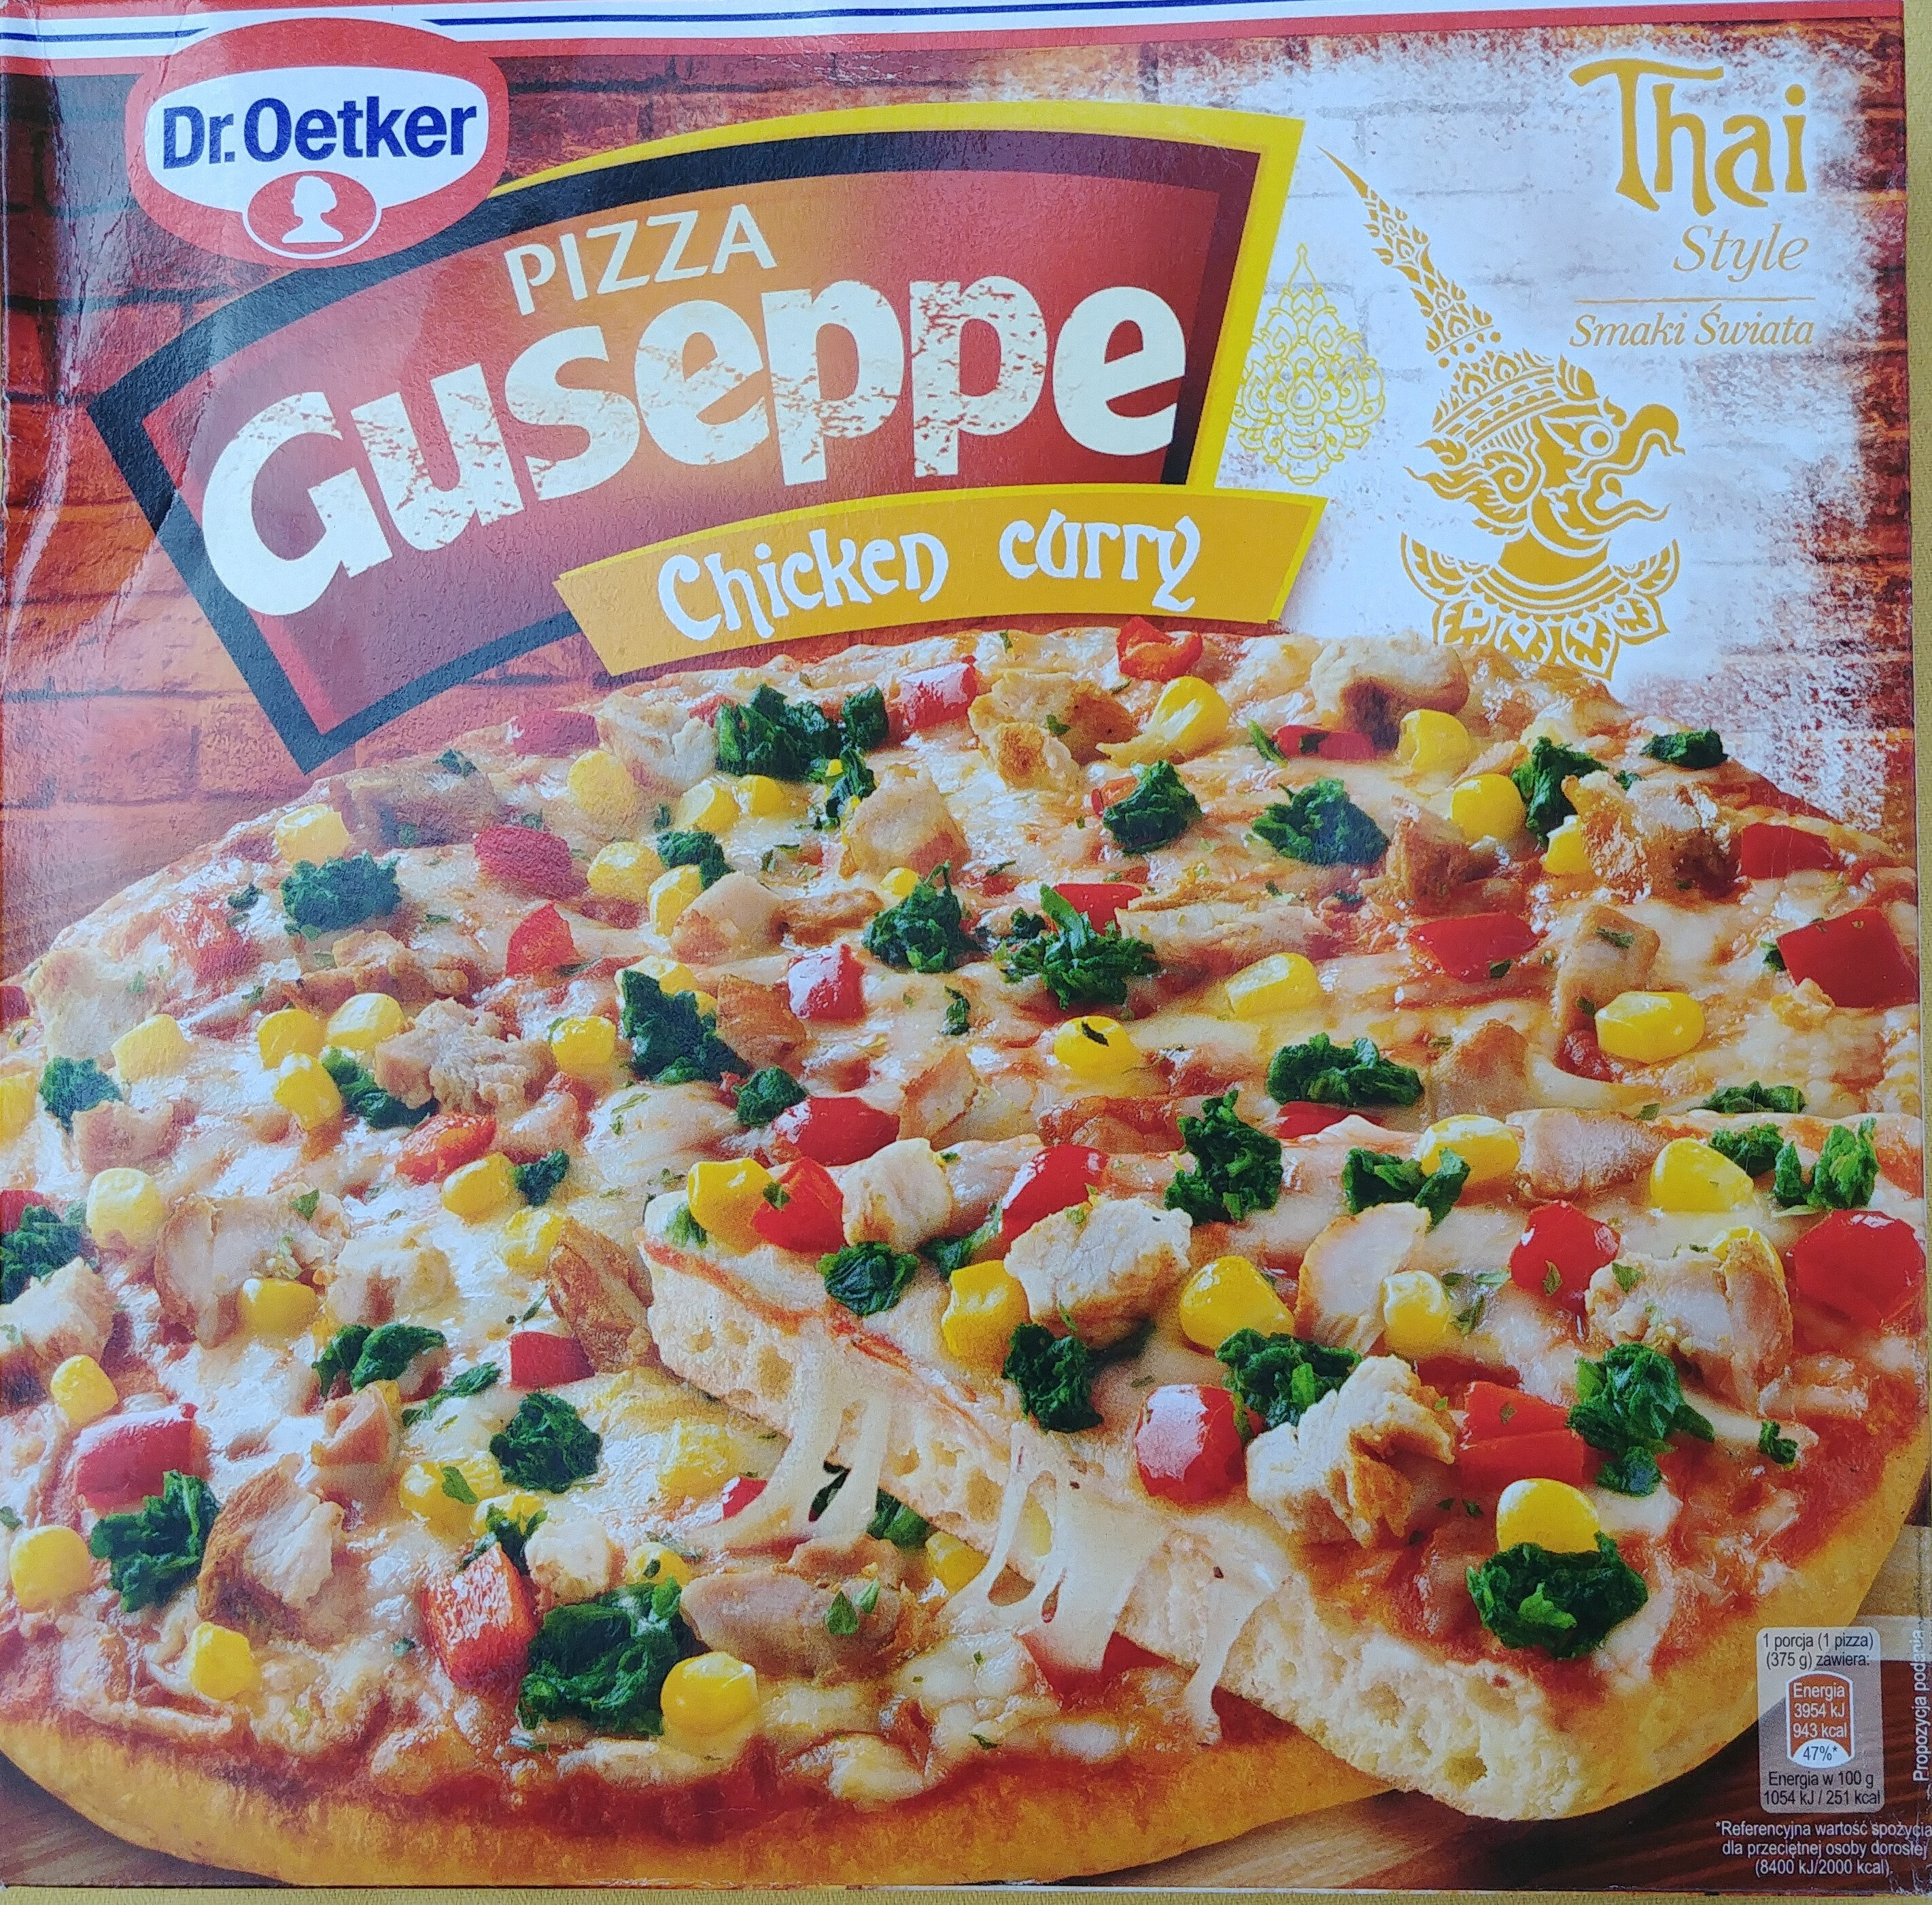 Pizza Guseppe Chicken Curry - Product - pl